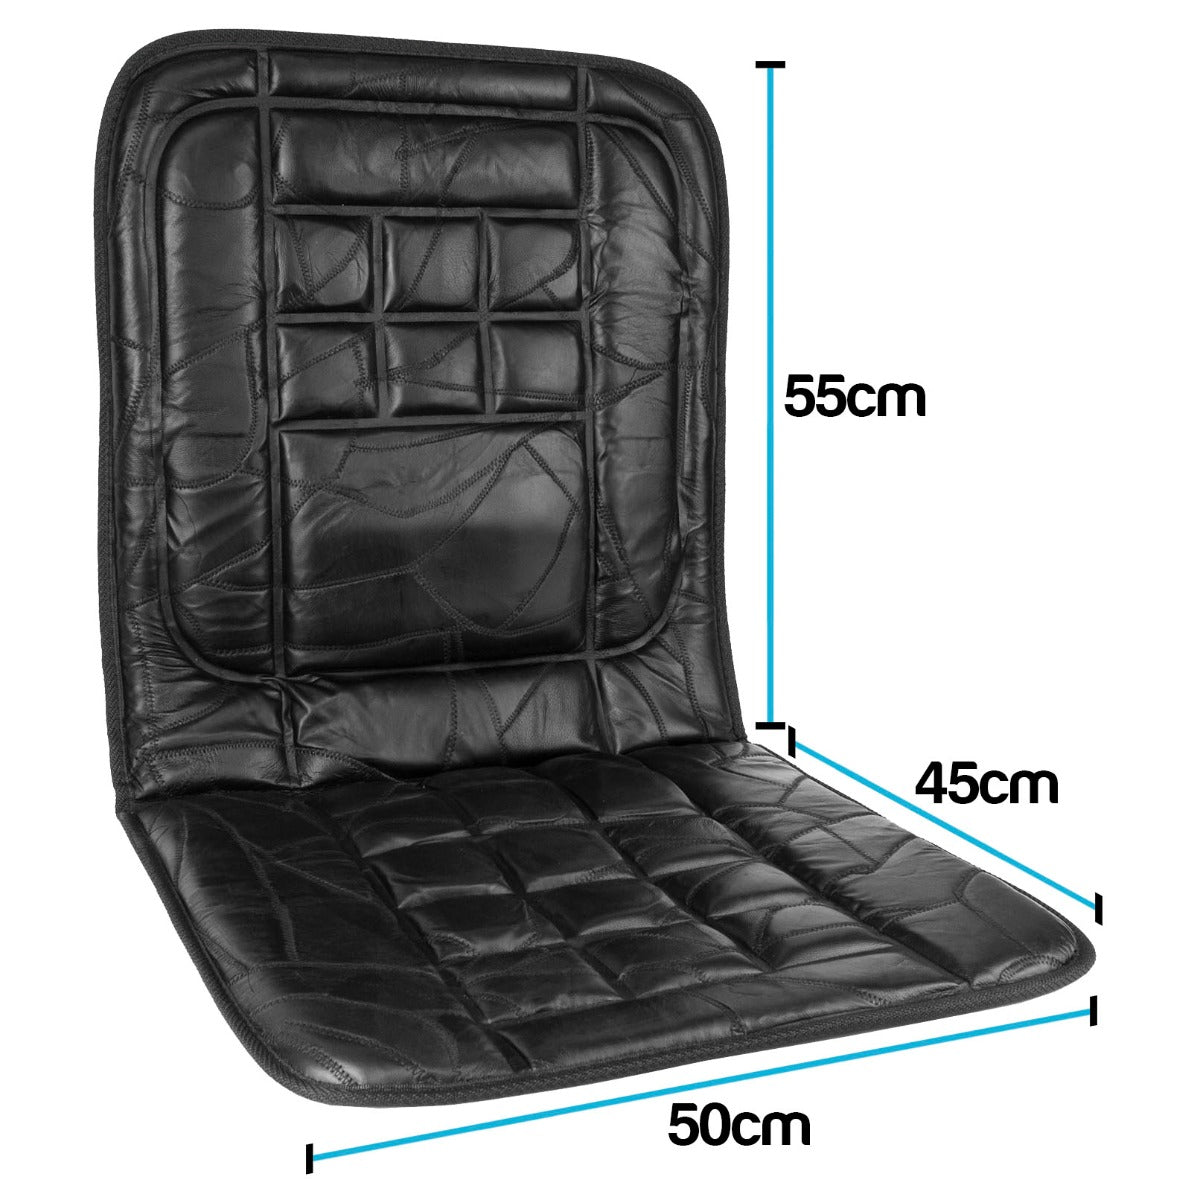 2 x Orthopaedic Leather Car Seat Covers - Black - Inspirely